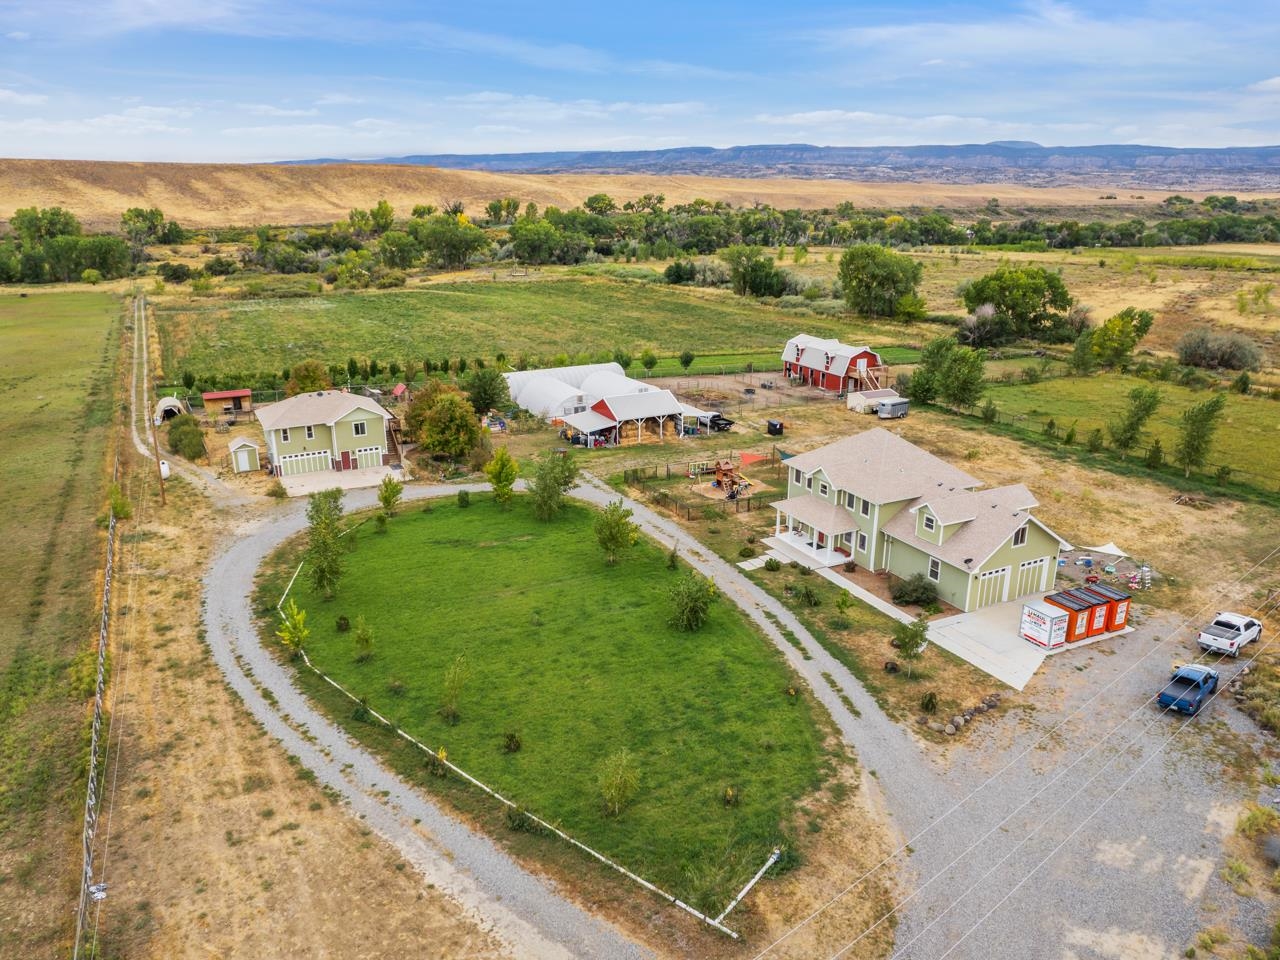 Welcome to this extraordinary estate in Whitewater, Colorado, where rural charm & modern luxury seamlessly blend on over 20 acres of land. Nestled against the backdrop of the awe-inspiring Grand Mesa & Uncompahgre Plateau, this property is a testament to Western Colorado's natural beauty. The main residence spans 5,372 square feet, with 2 stories & a fully finished basement. This home offers spacious living areas, including 5 bedrooms & 4 bathrooms. Inside you’ll find hardwood floors & granite countertops with stainless steel appliances in the kitchen. Natural light pours in, & you’ll enjoy having 2 separate living spaces, an office, a game room, a sunroom, & a large storage room in the basement. The attached 2-car garage provides convenience & additional storage. Additional features include 2 heating and cooling units for optimal comfort & a tankless hot water heater. There's even potential to add a kitchen to the basement. The accessory dwelling unit (ADU) is a 1,029 square foot space, offering 2 bedrooms, 1 bathroom, & a charming living space. Perched atop a spacious 3-car garage, the ADU boasts a beautiful deck overlooking the property. Electric & water meters are separate from the main home & this space is also outfitted with a tankless hot water heater. This property is a dream for those seeking an outdoor lifestyle. It boasts a 4-stall horse barn with an unfinished loft, tack room, & separate building for hay storage. 3 generous greenhouses are perfect for gardening & farming enthusiasts. Additionally, there's a dog run, goat pens, a chicken coop, & a fenced play yard. There's an extra outbuilding & an apiary for beekeeping enthusiasts. 2 storage sheds offer plenty of room for tools & equipment. The front & side yards are beautifully landscaped with mature trees & bushes, while the property features an orchard & fields for agricultural pursuits. A highlight of the property is its access to Kannah Creek, where a yurt sits on the waterfront, providing a unique space for gatherings & there is a small stage for performances. With 15 acres of irrigated land & no HOA restrictions, you have the freedom to bring your vision to life. There's plenty of space for RV parking, making it convenient for your adventure plans. Situated just outside the bustling city of Grand Junction, Colorado, this property offers a tranquil retreat while still being close to all the amenities & outdoor activities that define Western Colorado living. Welcome home to Whitewater, CO.